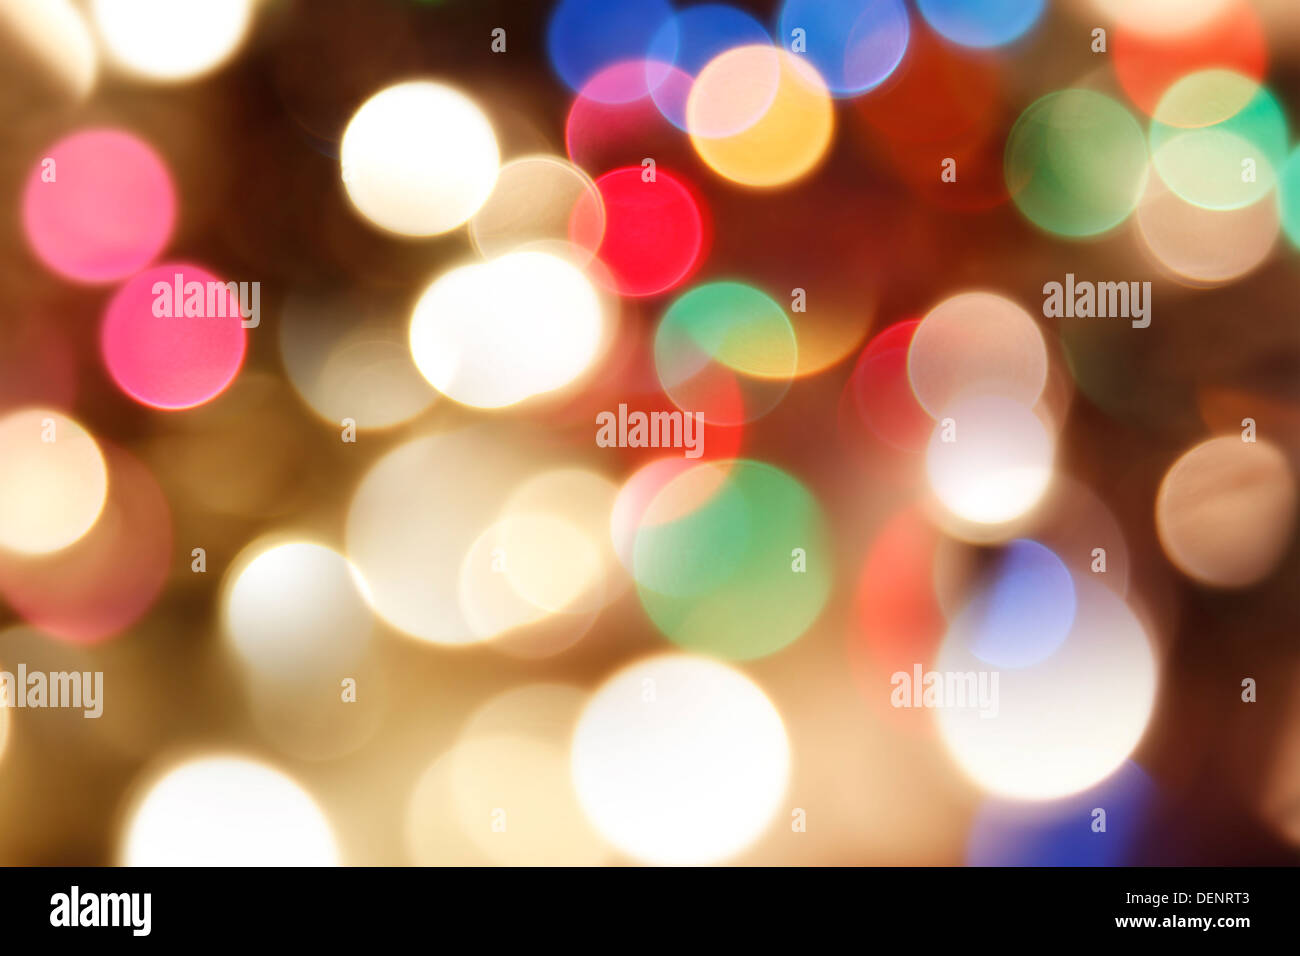 Bright colorful lights abstract background Stock Photo